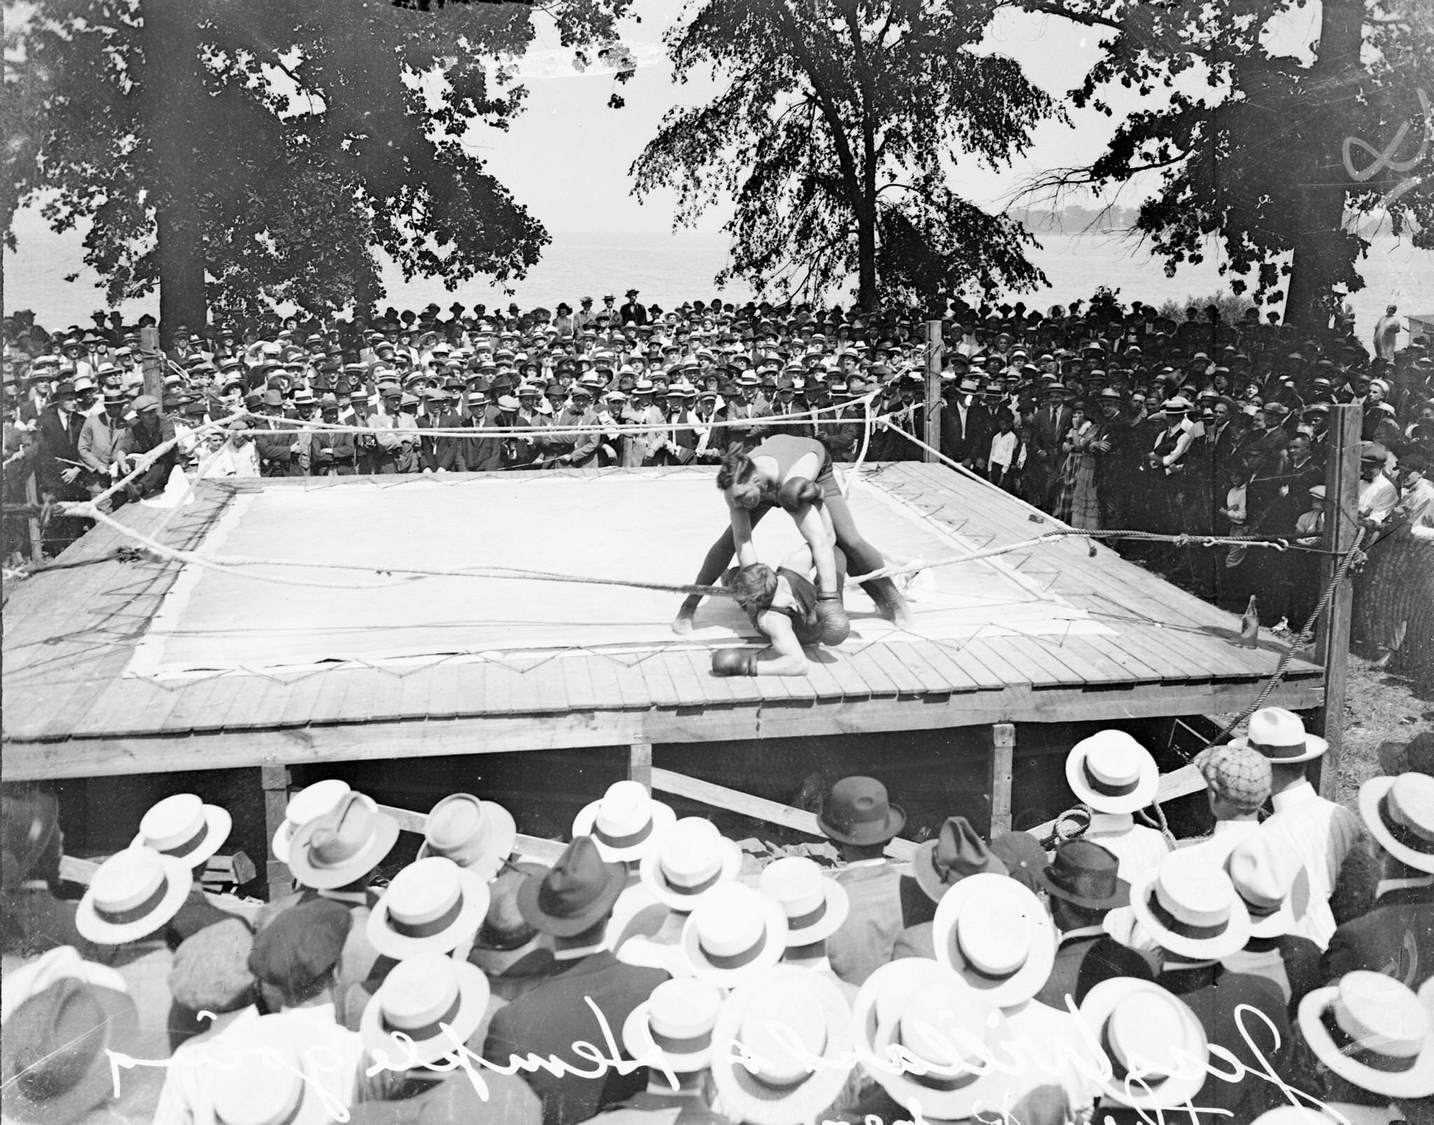 Boxers Jess Willard and Jack Hemple sparring in a ring located near Lake Michigan in Chicago, Illinois, 1916.